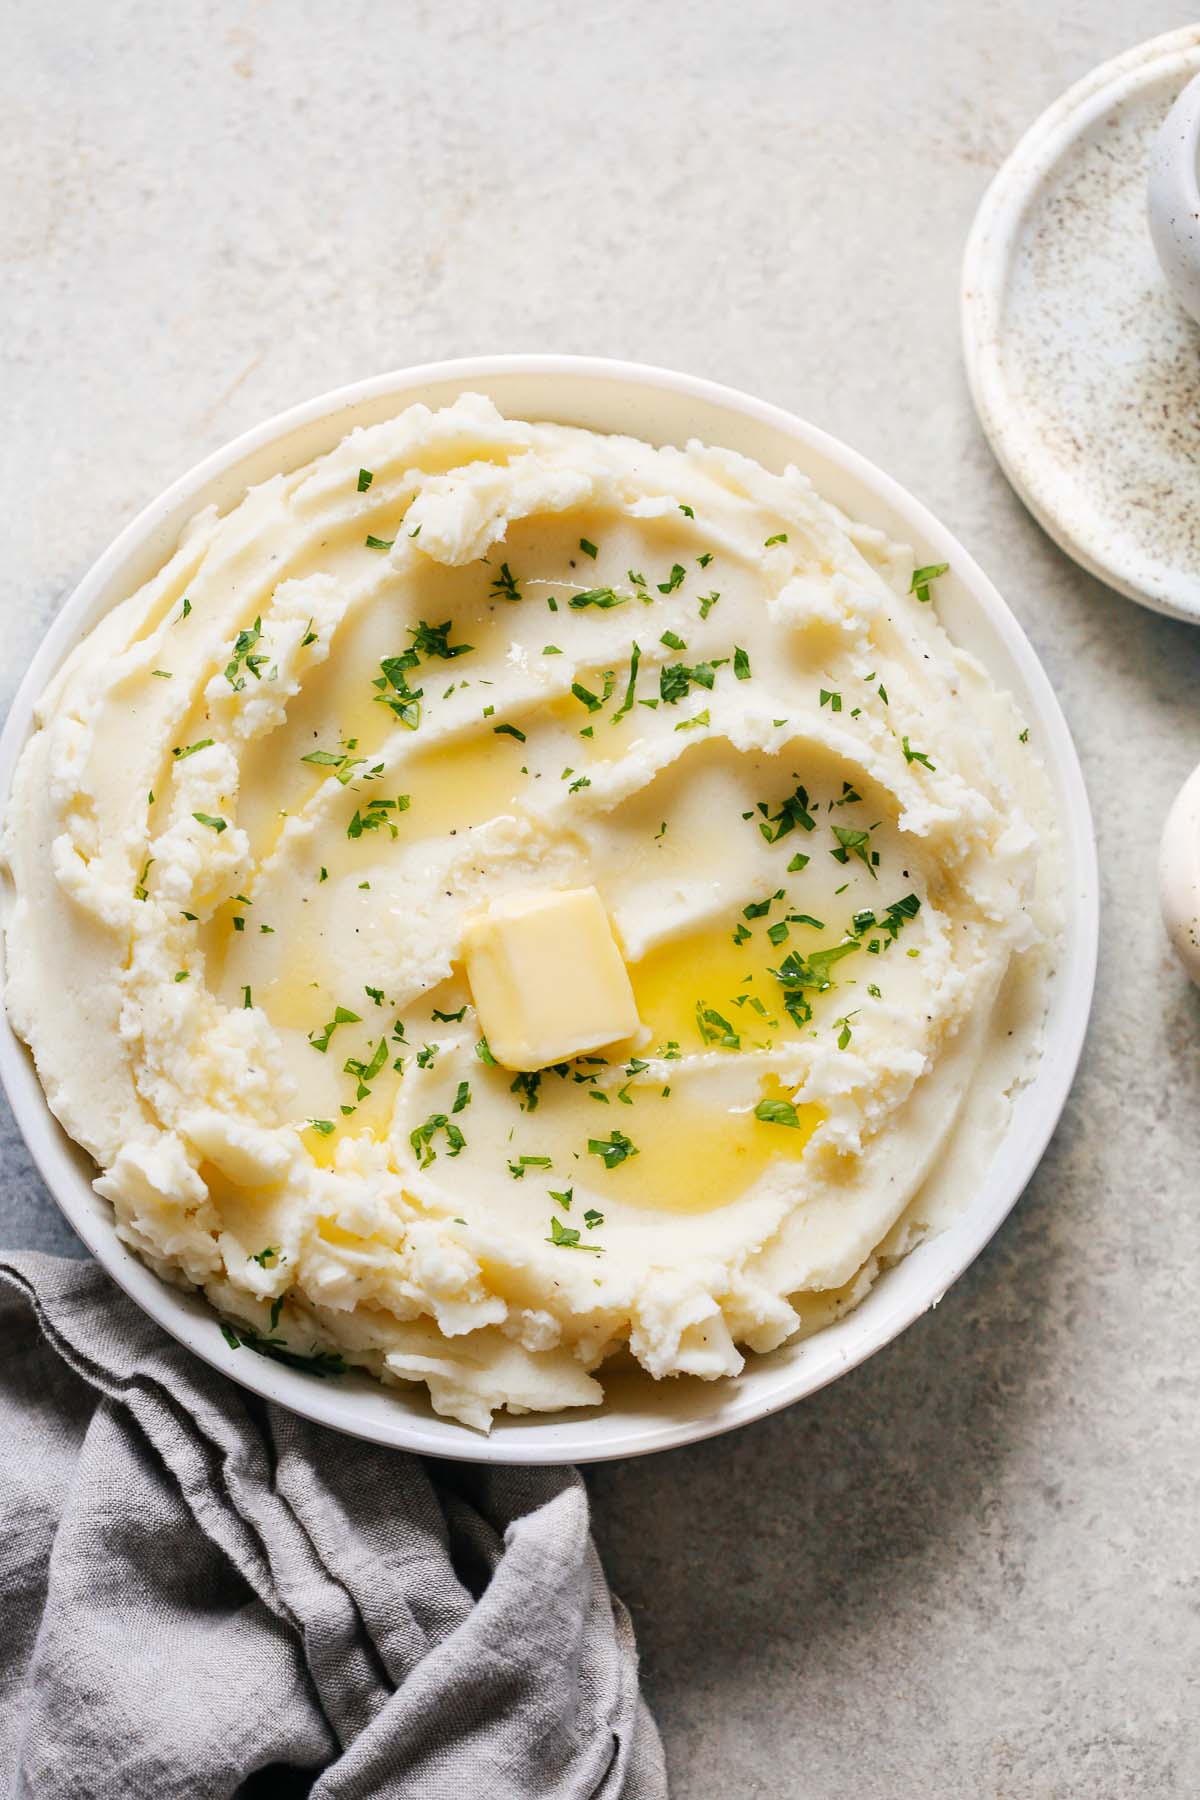 A large bowl of mashed potatoes with butter melted on top.